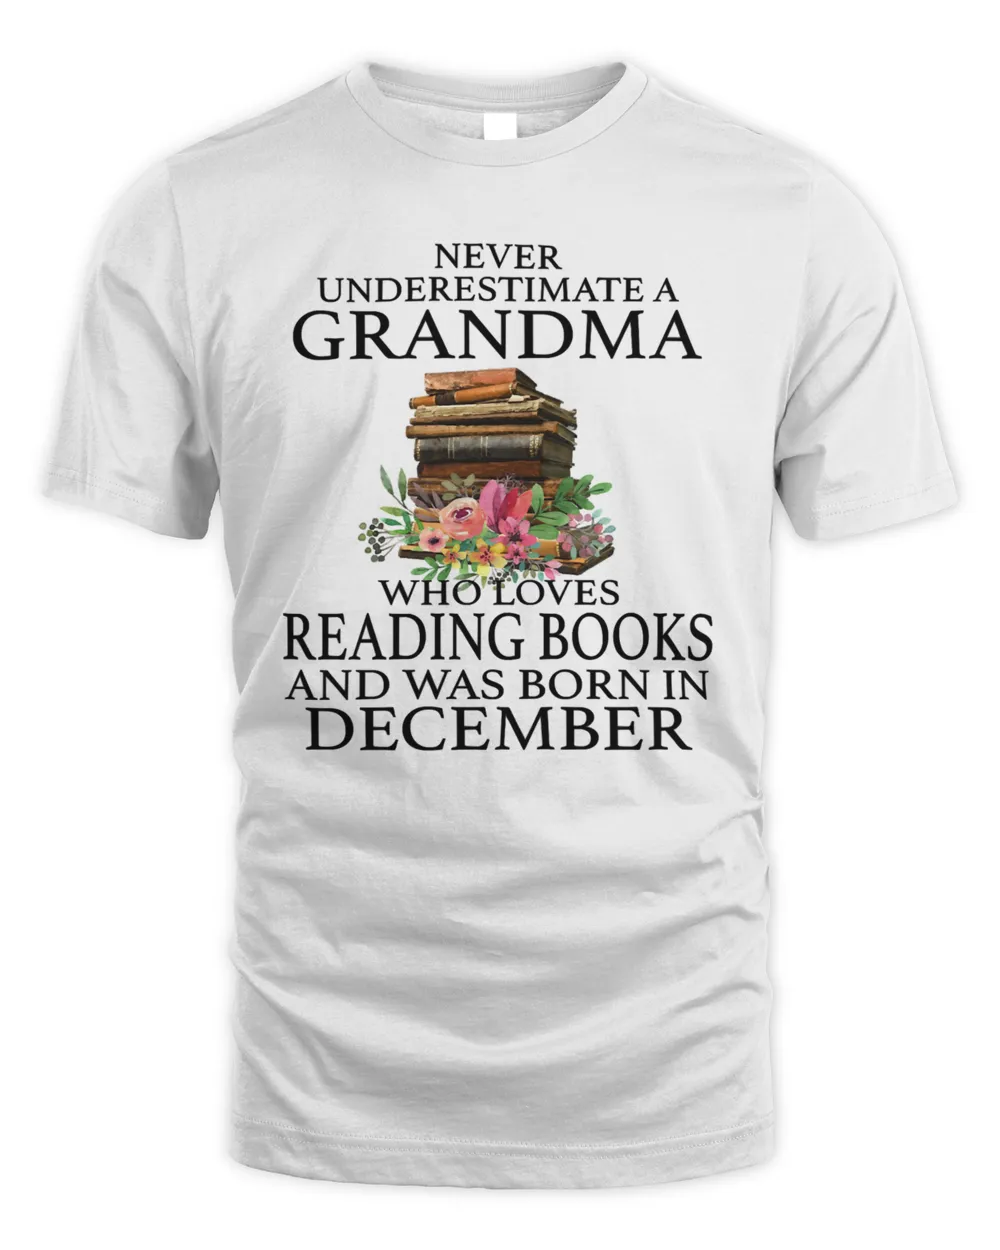 Book Never Underestimate a Grandma who loves Reading Books and was born in December 567 booked